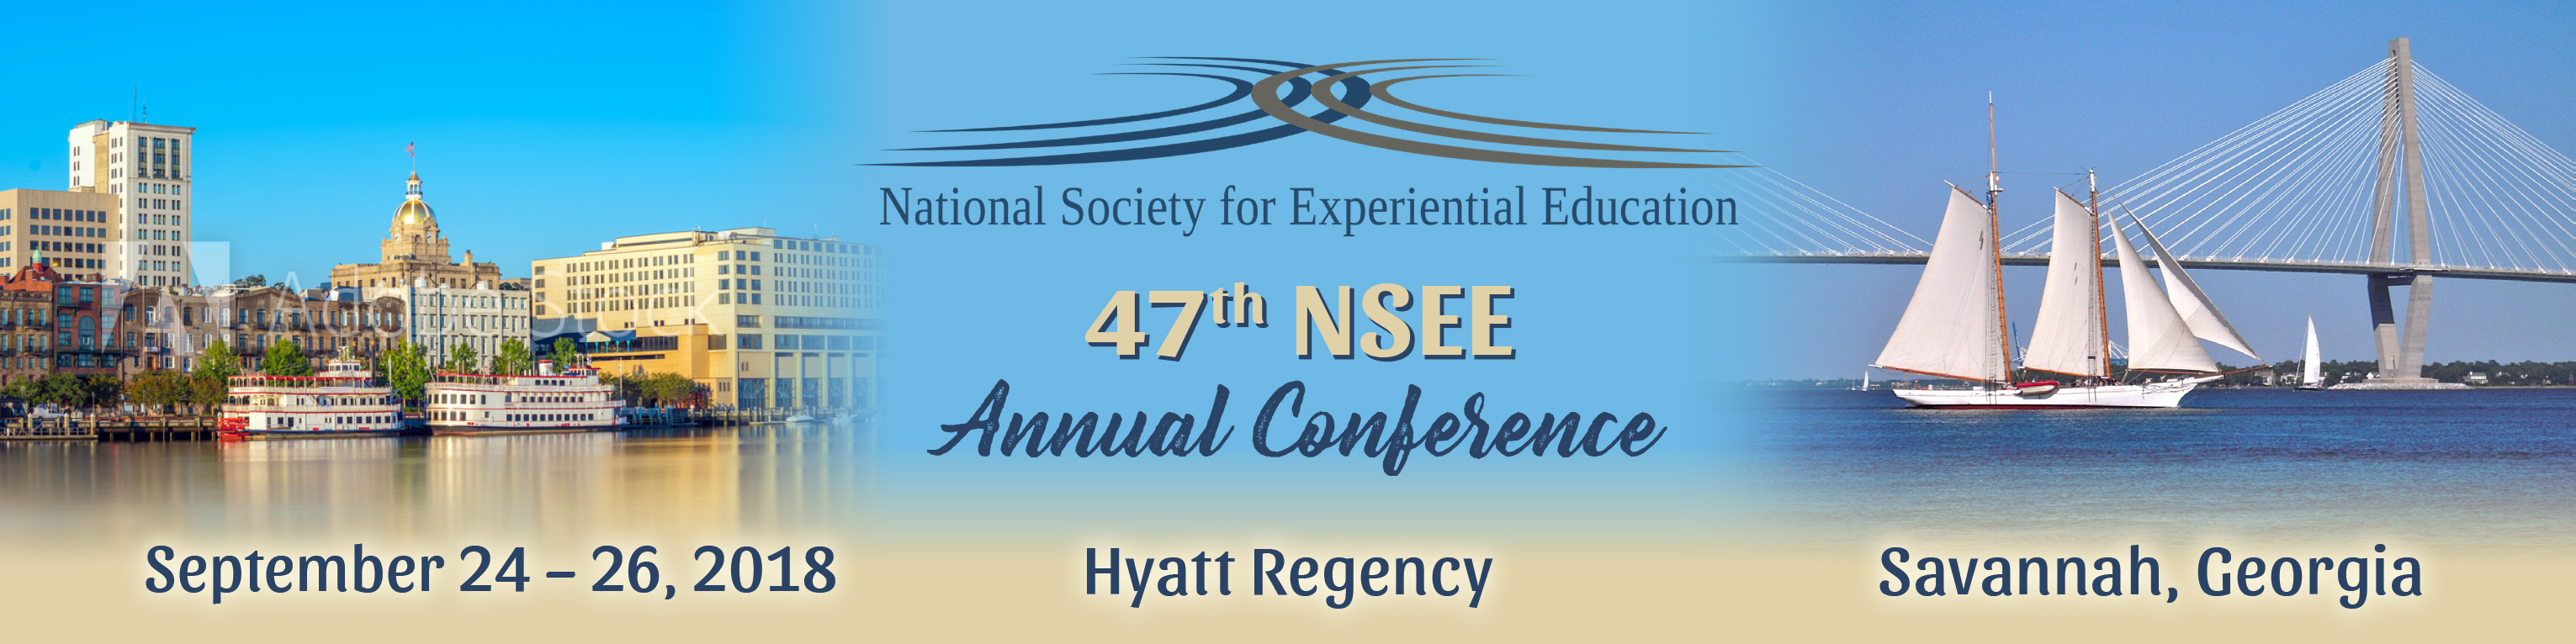 NSEE 2018 Conference Banner